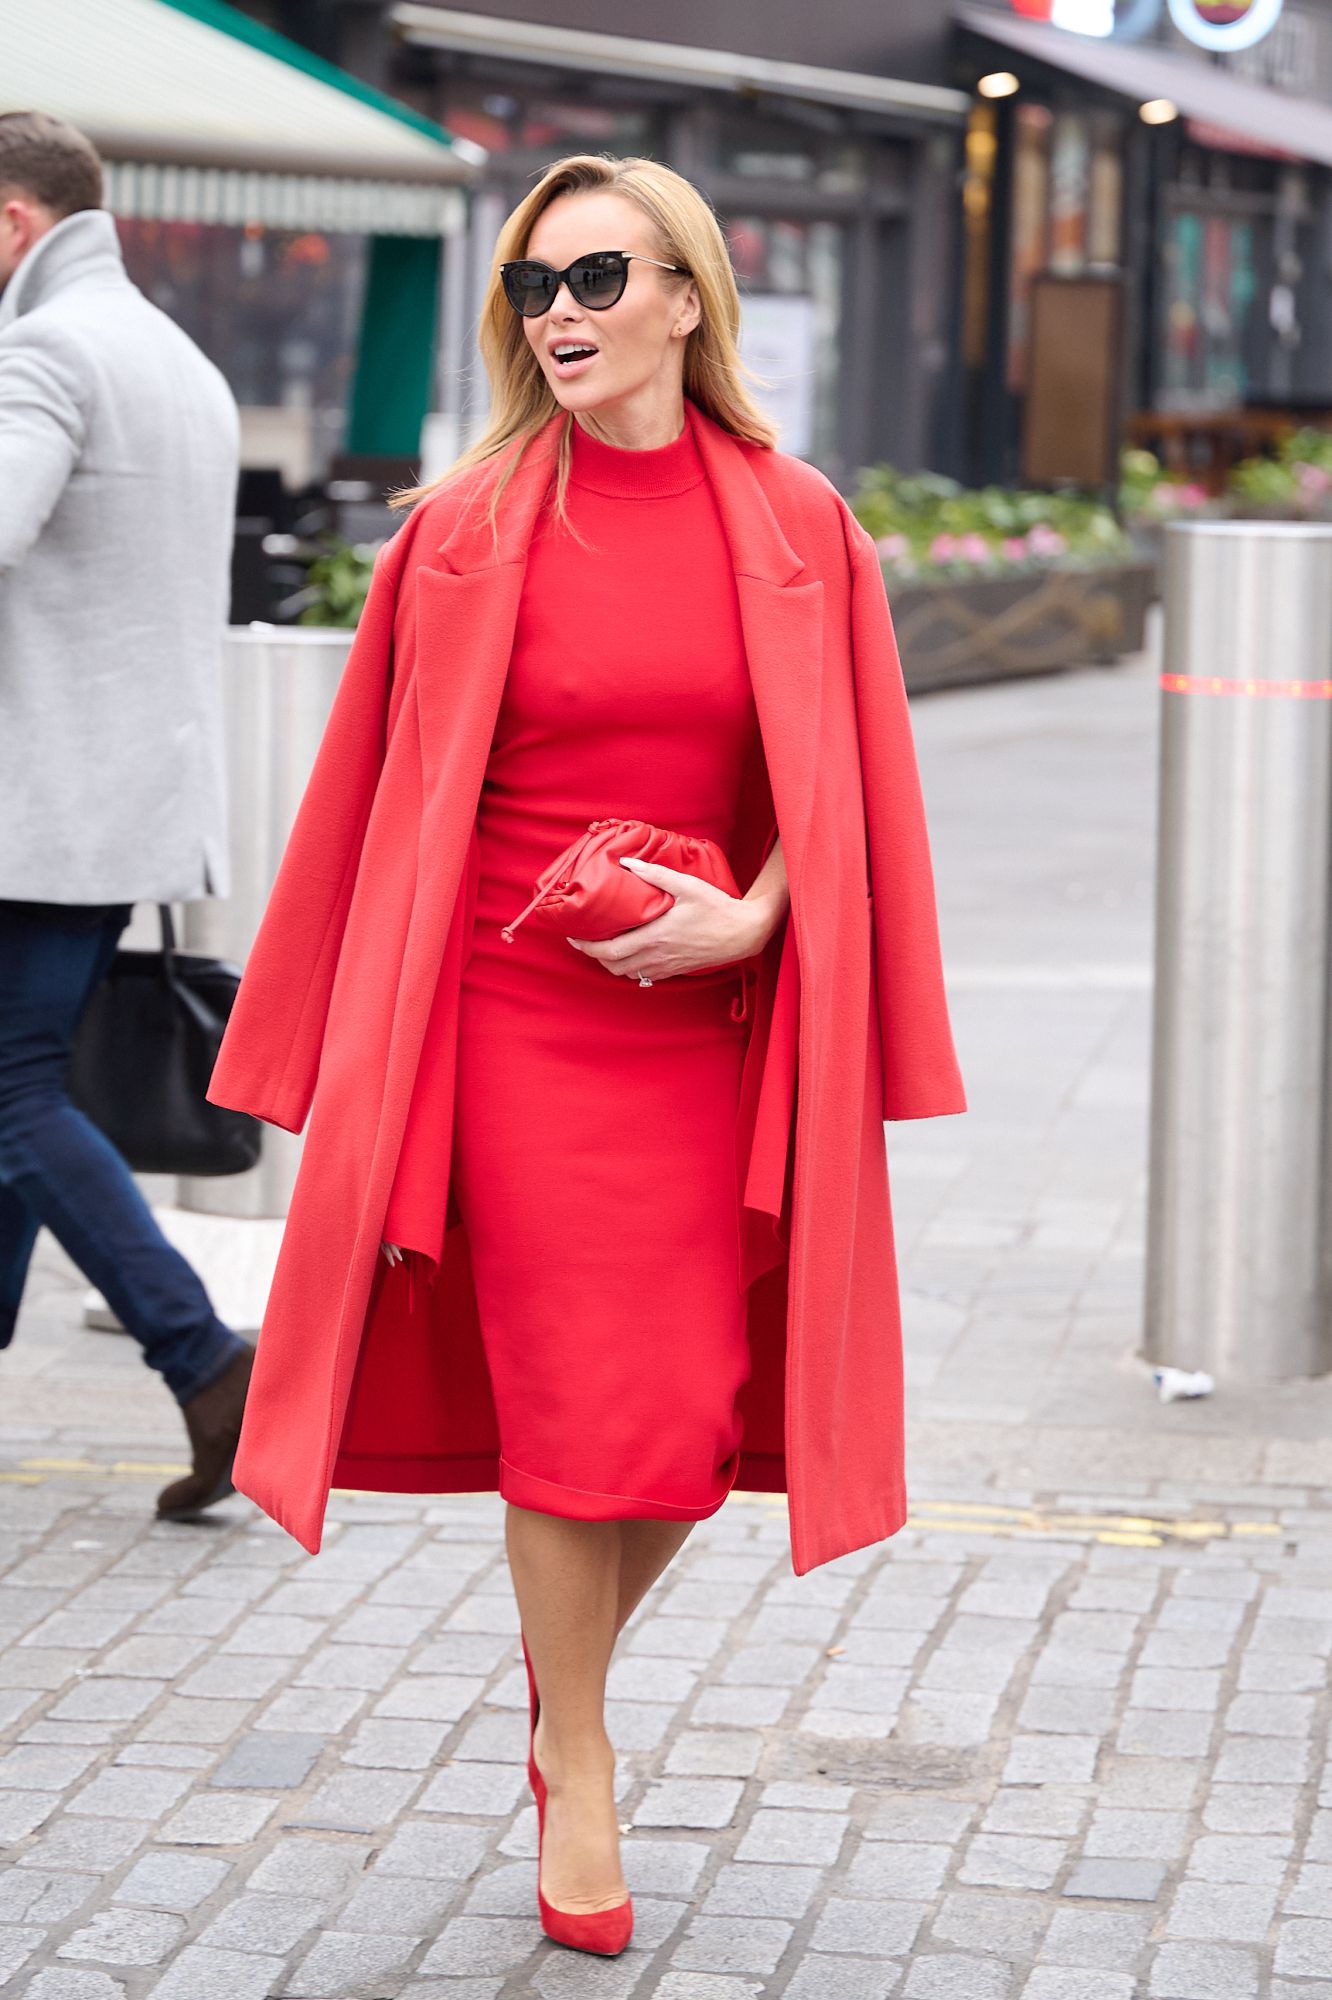 Amanda Holden wows in an all-red outfit